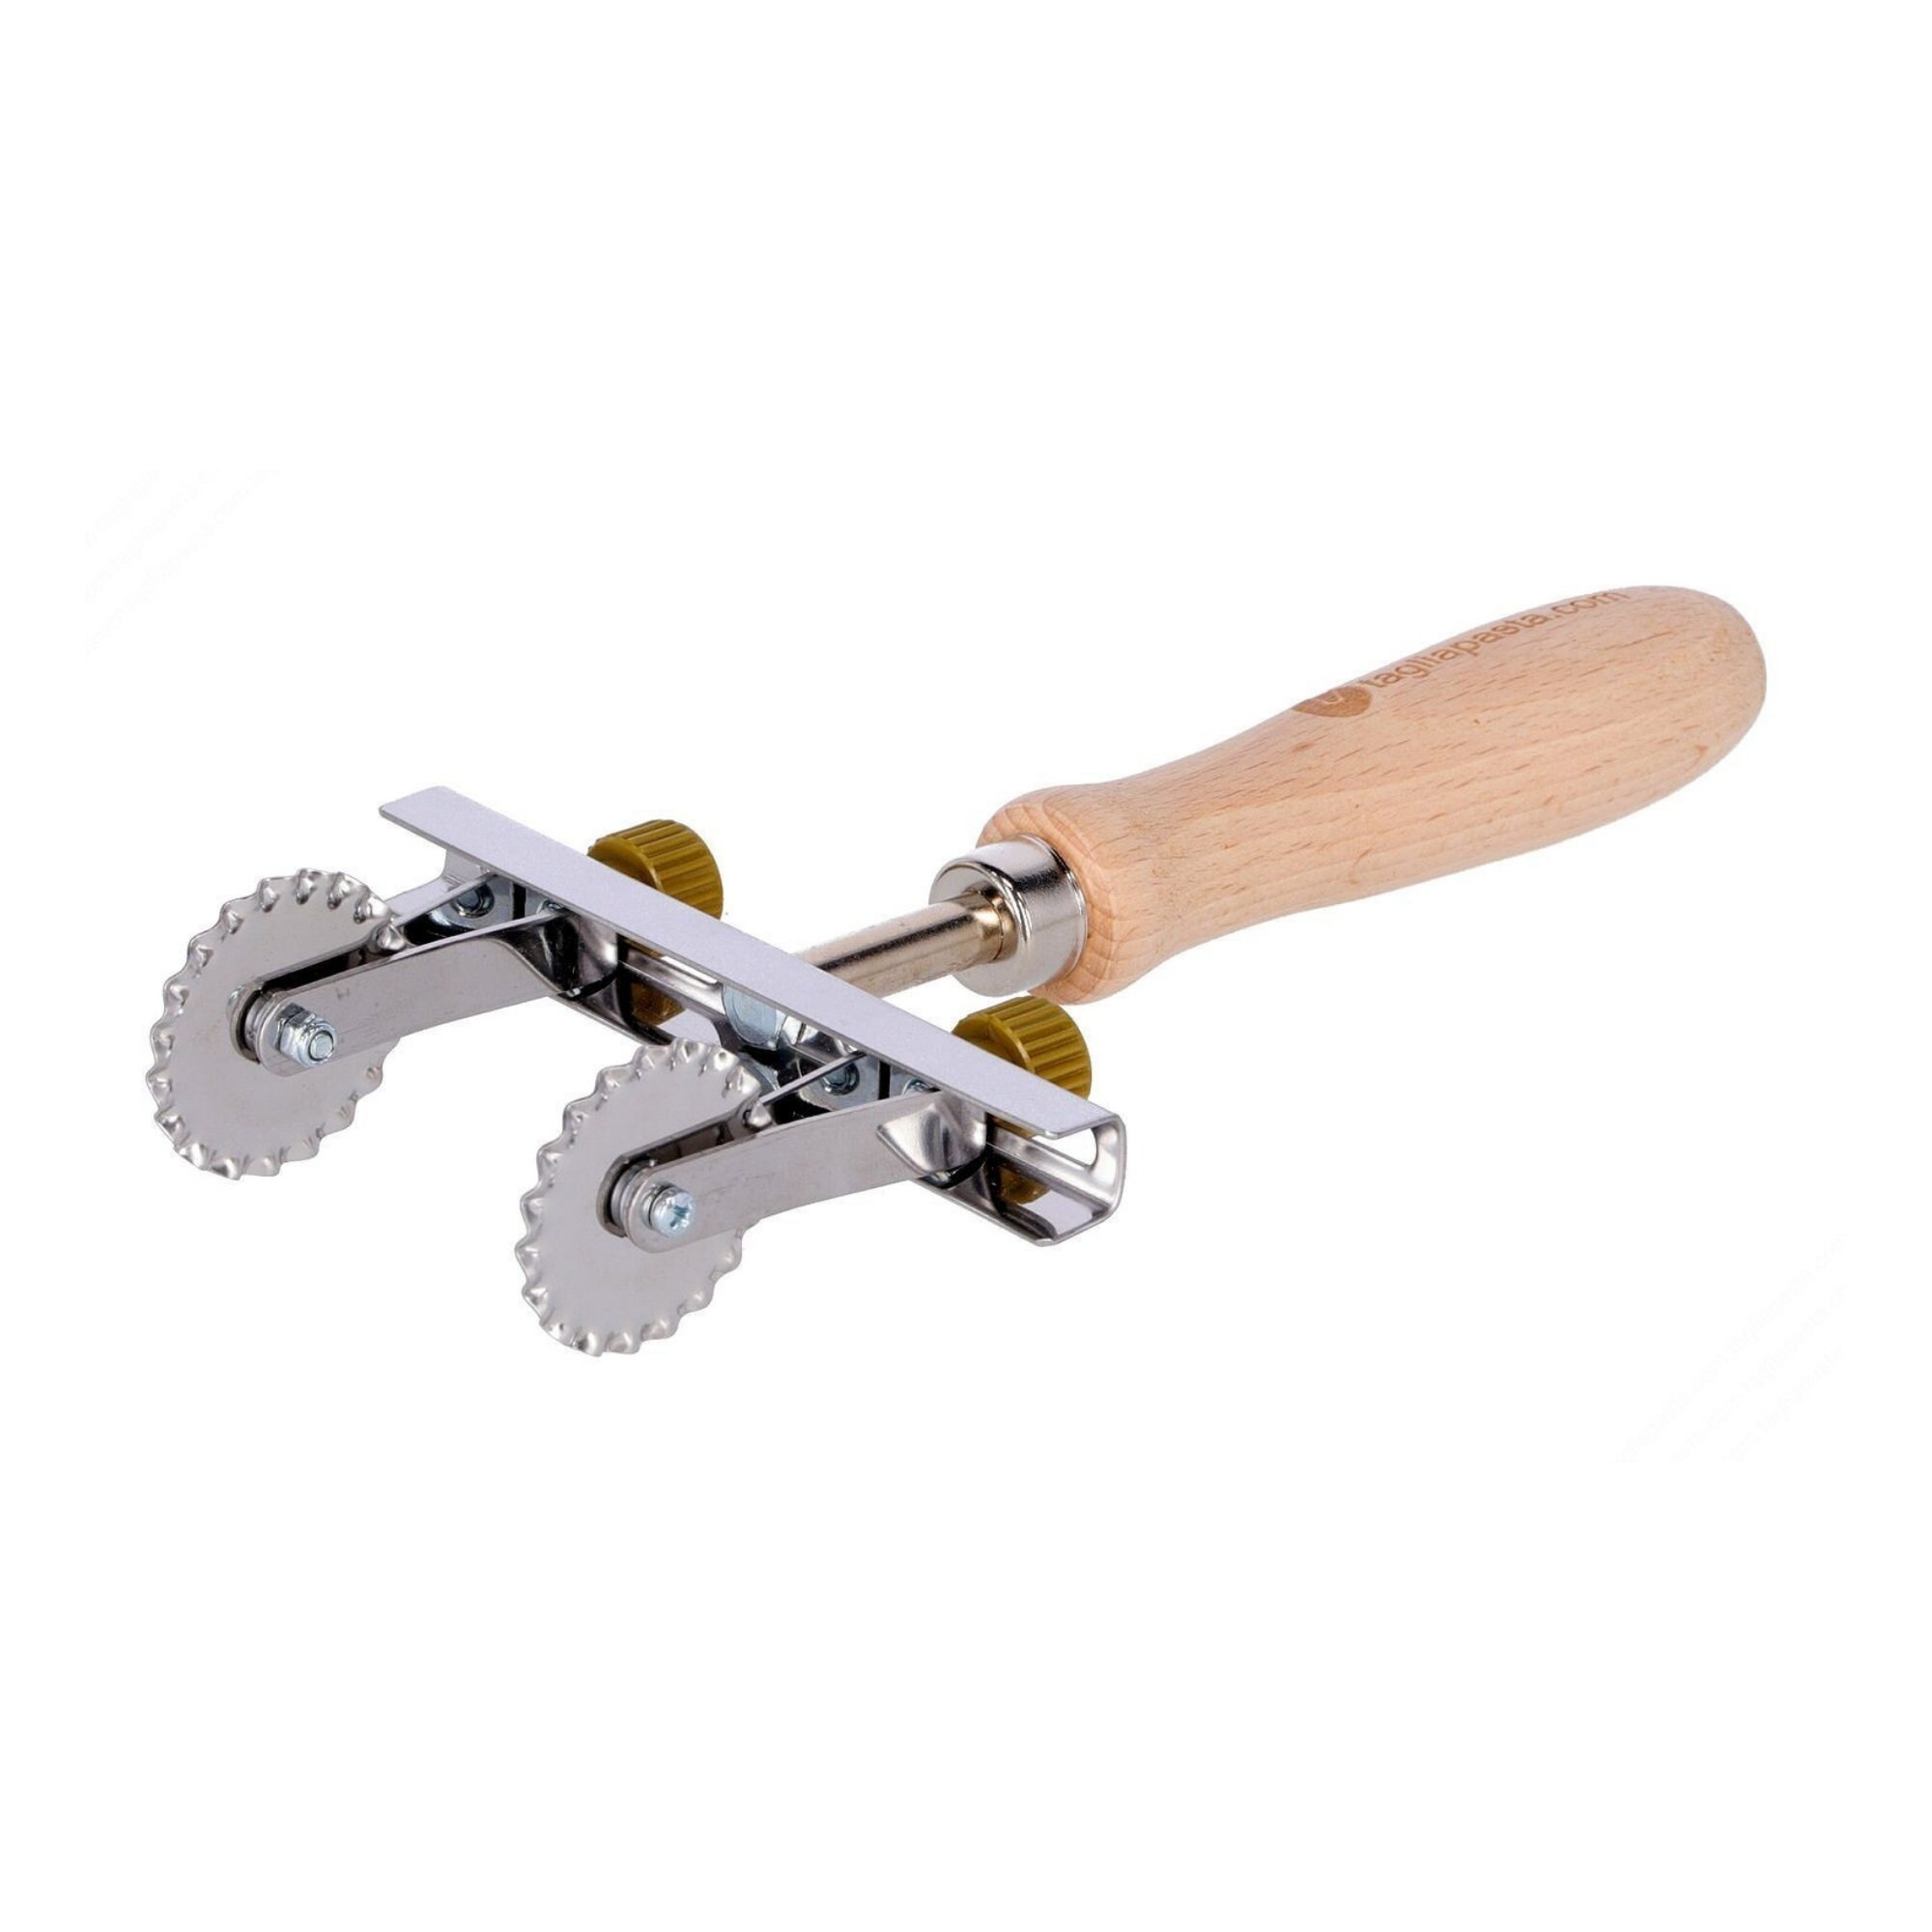 Adjustable pasta cutter with 4 stainless steel smooth wheels